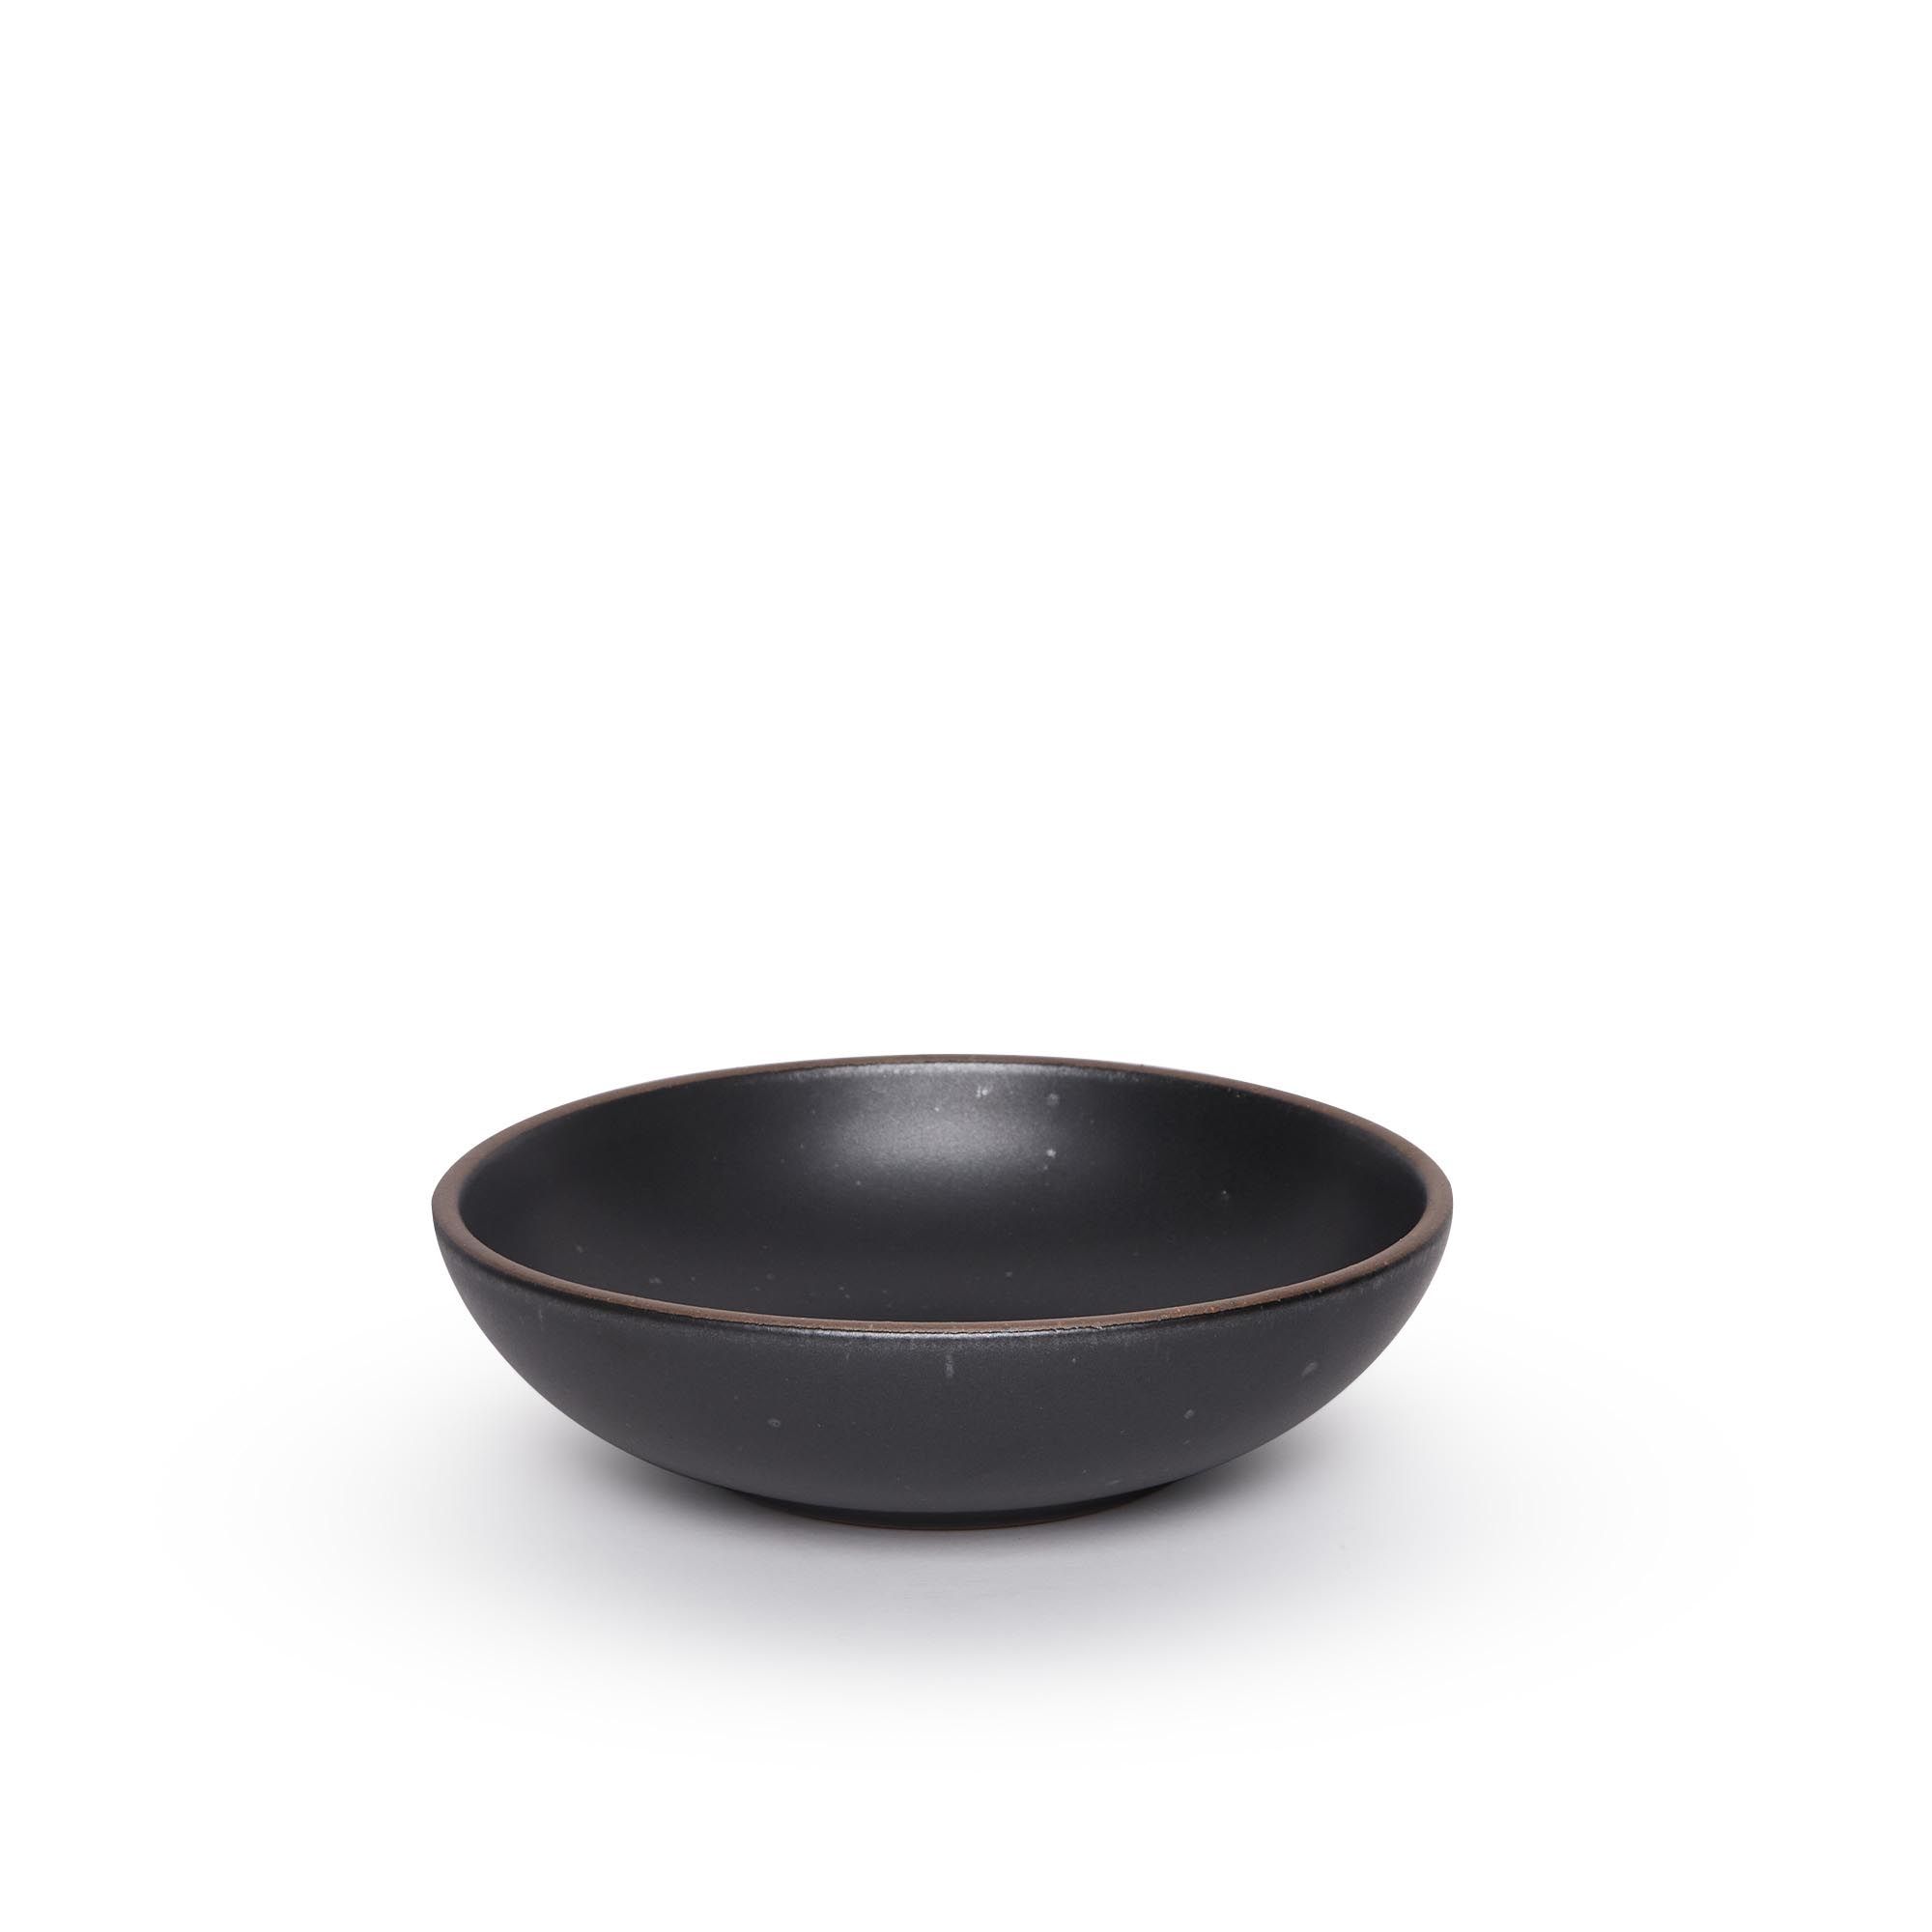 A dinner-sized shallow ceramic bowl in a graphite black color featuring iron speckles and an unglazed rim